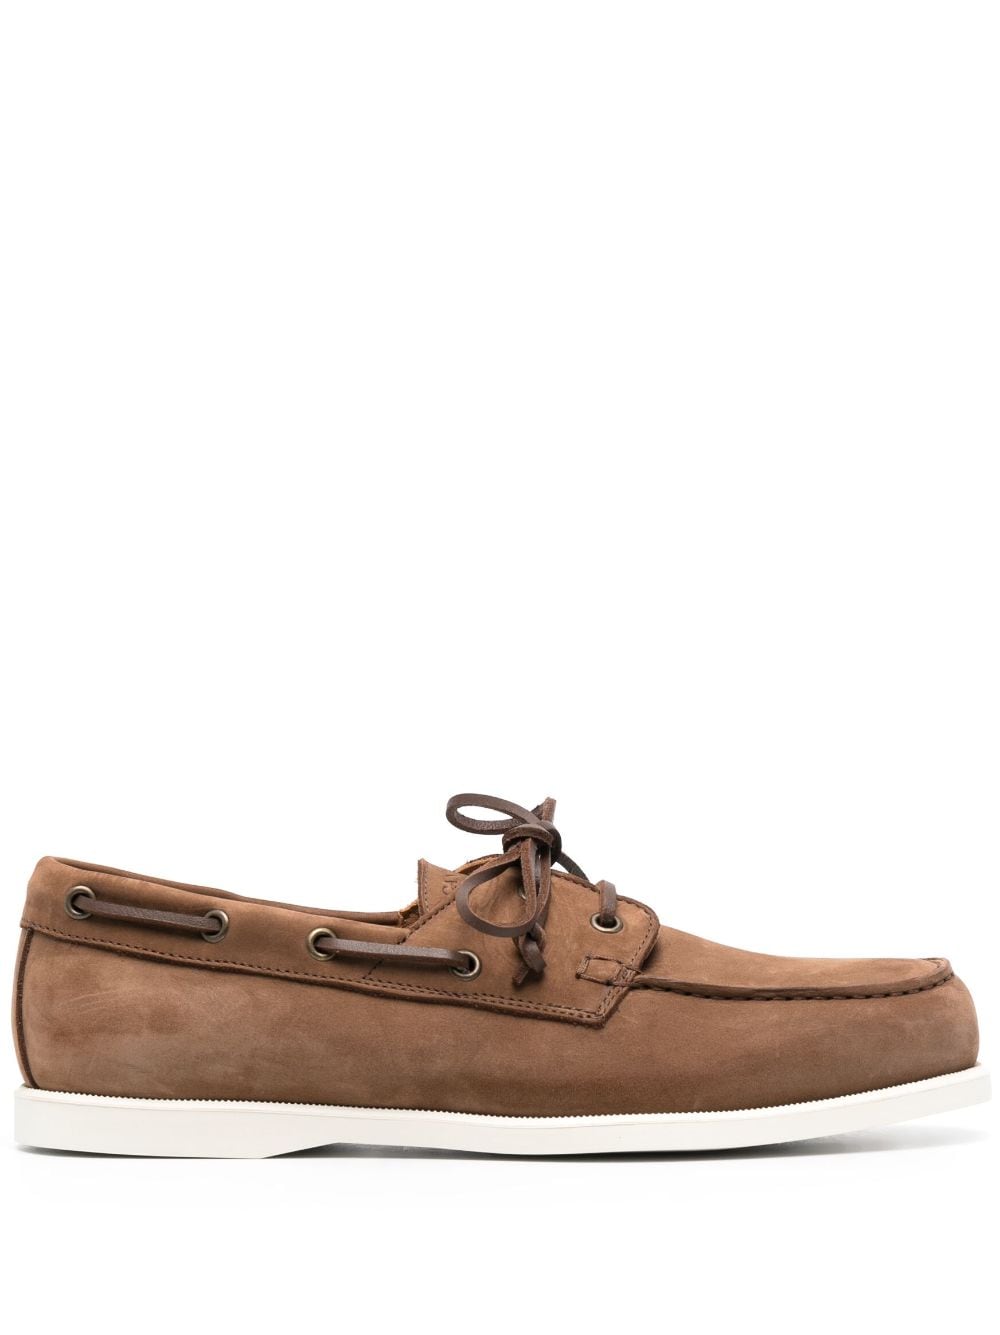 Canali lace-up suede loafers - Brown von Canali